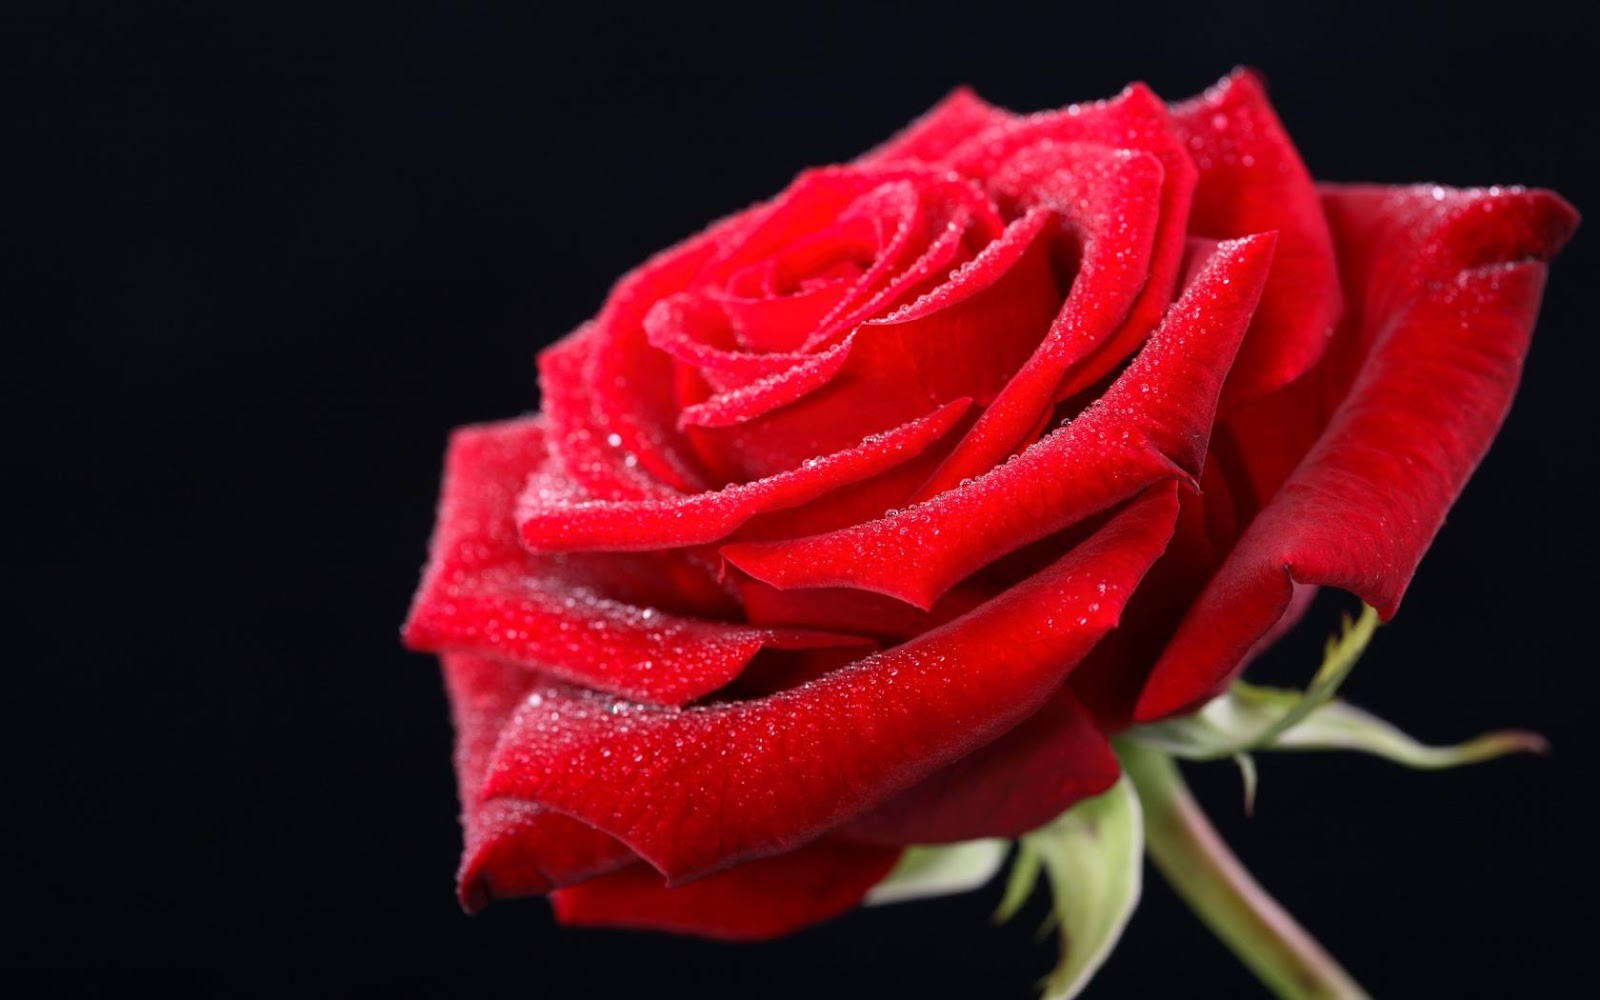 Red rose HD wallpaper as a gift on on valentines day 2016